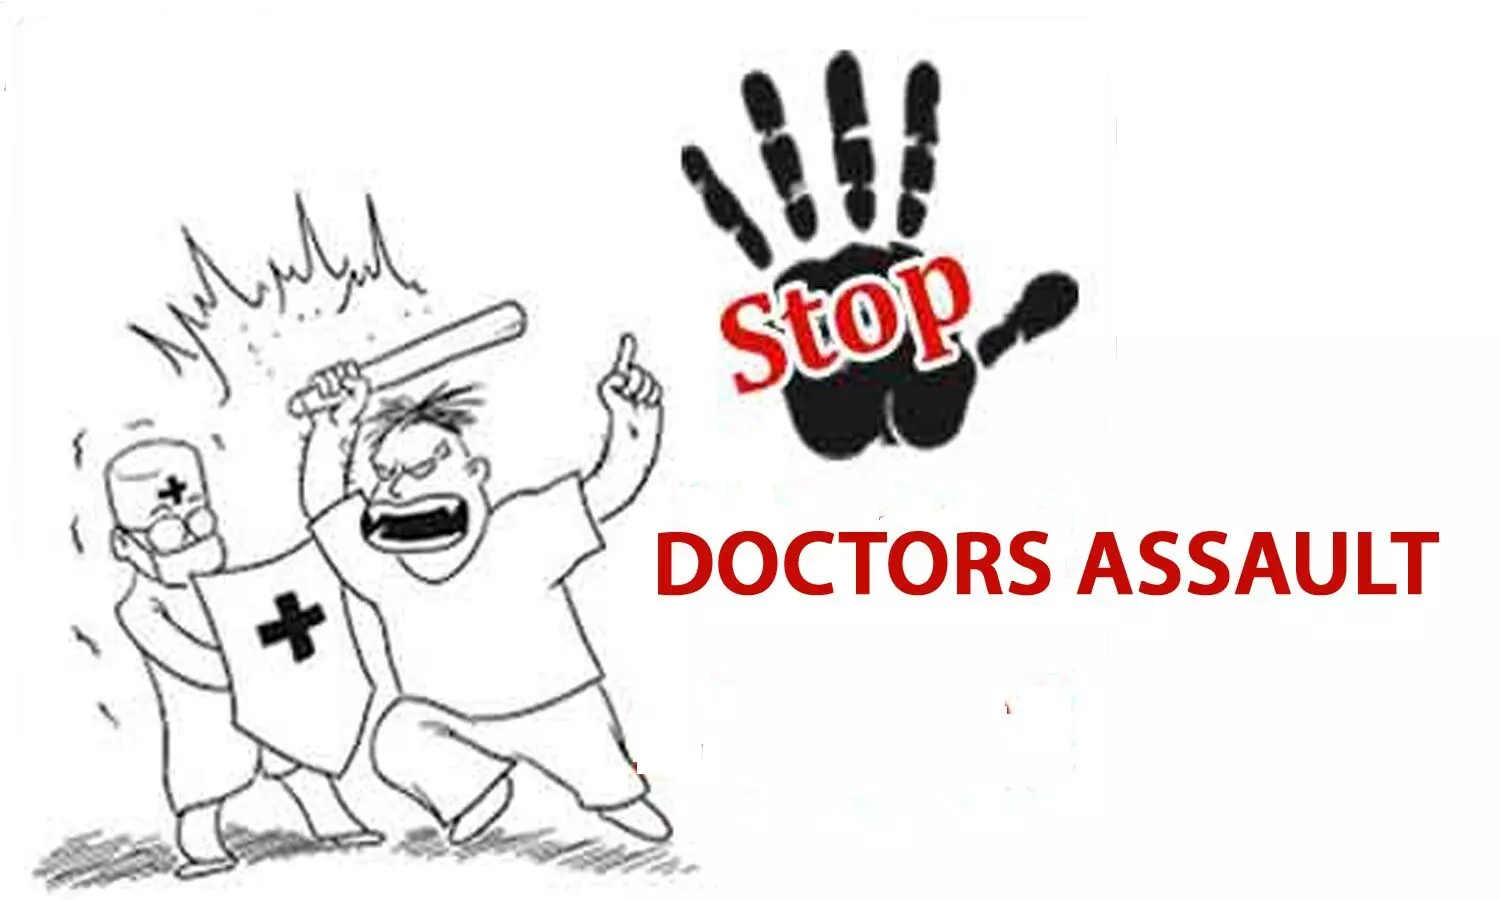 Patients kin assaulting doctors, hospital staff has become regular feature: HC tells MP Govt to amend law